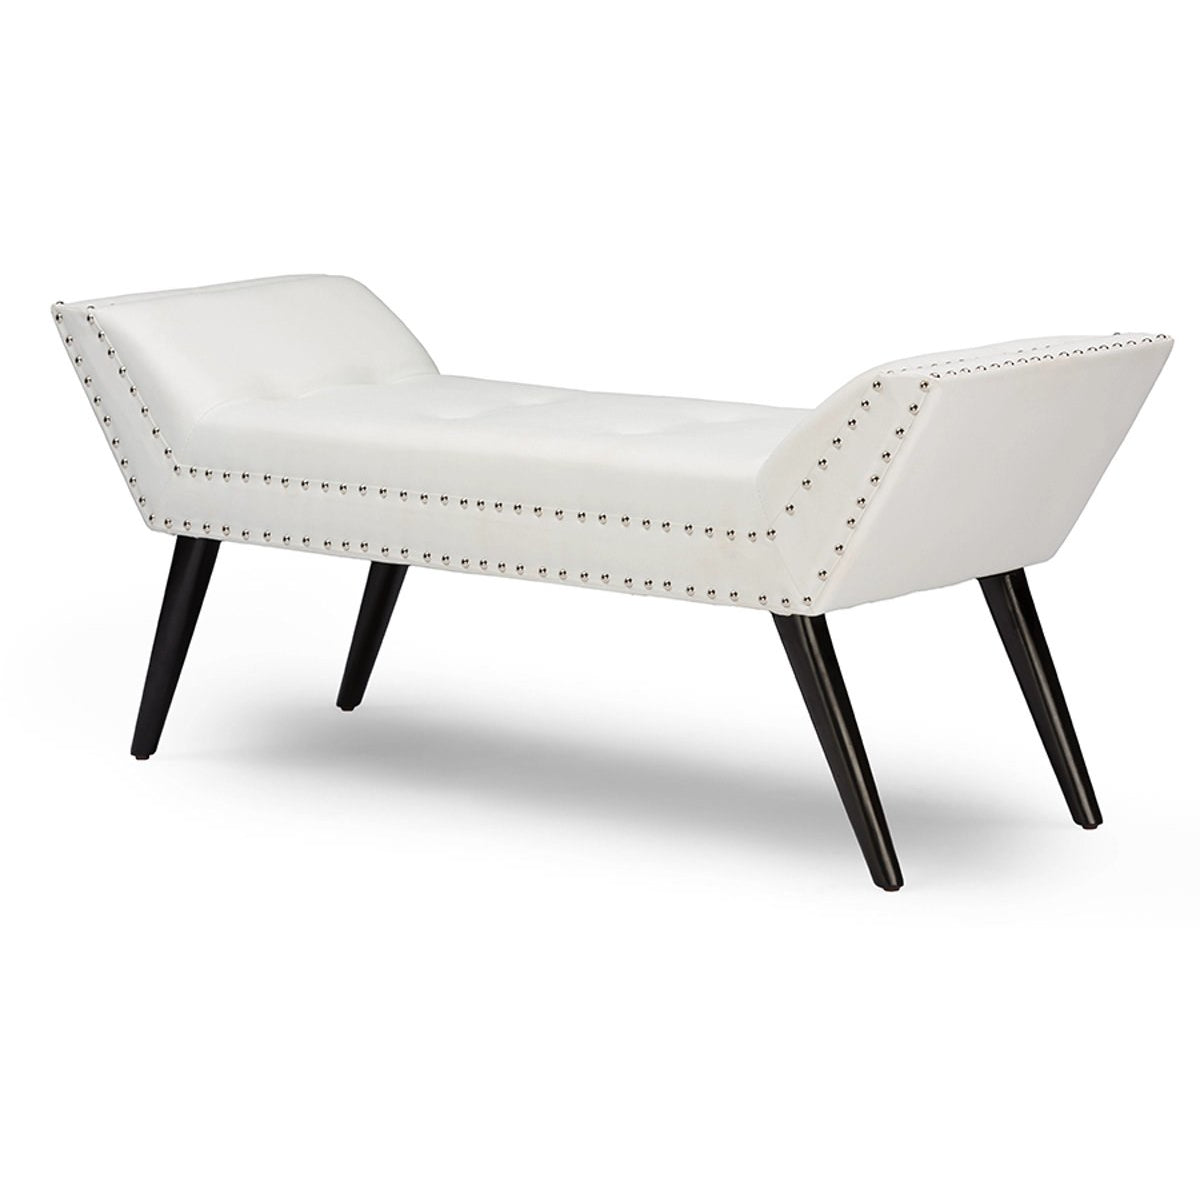 Baxton Studio Tamblin Modern and Contemporary White Faux Leather Upholstered Large Ottoman Seating Bench Baxton Studio-benches-Minimal And Modern - 2